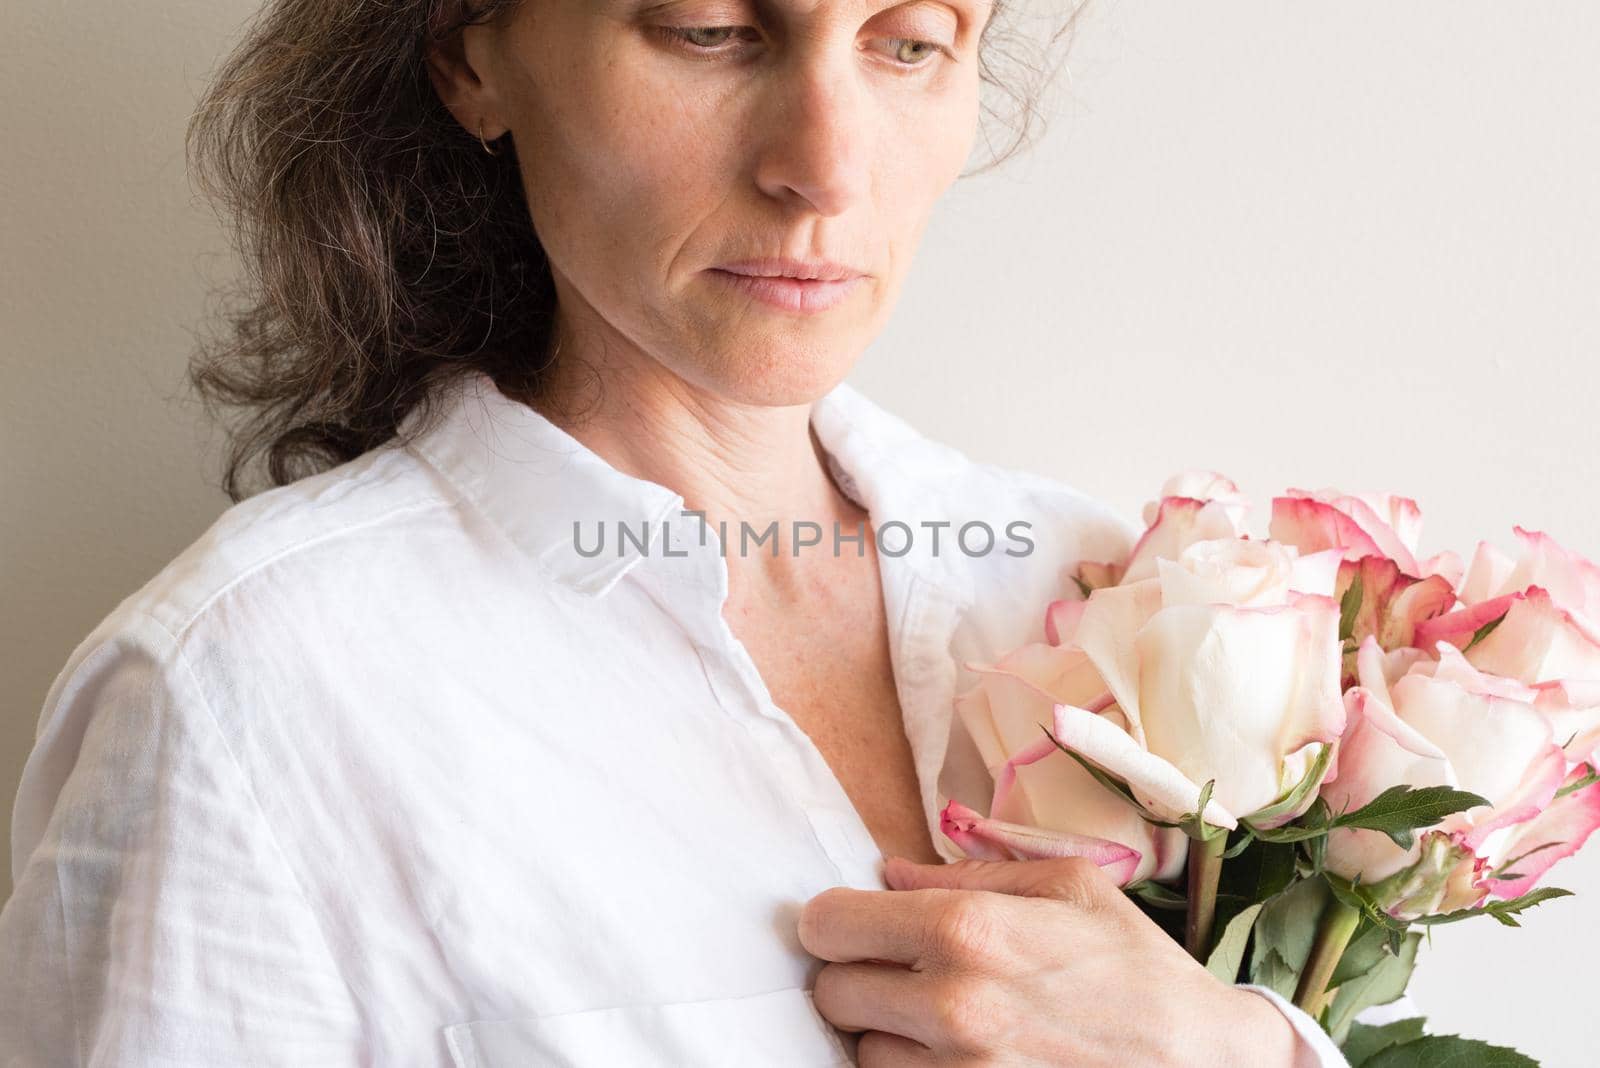 Middle aged woman holding roses and looking pensive (cropped)